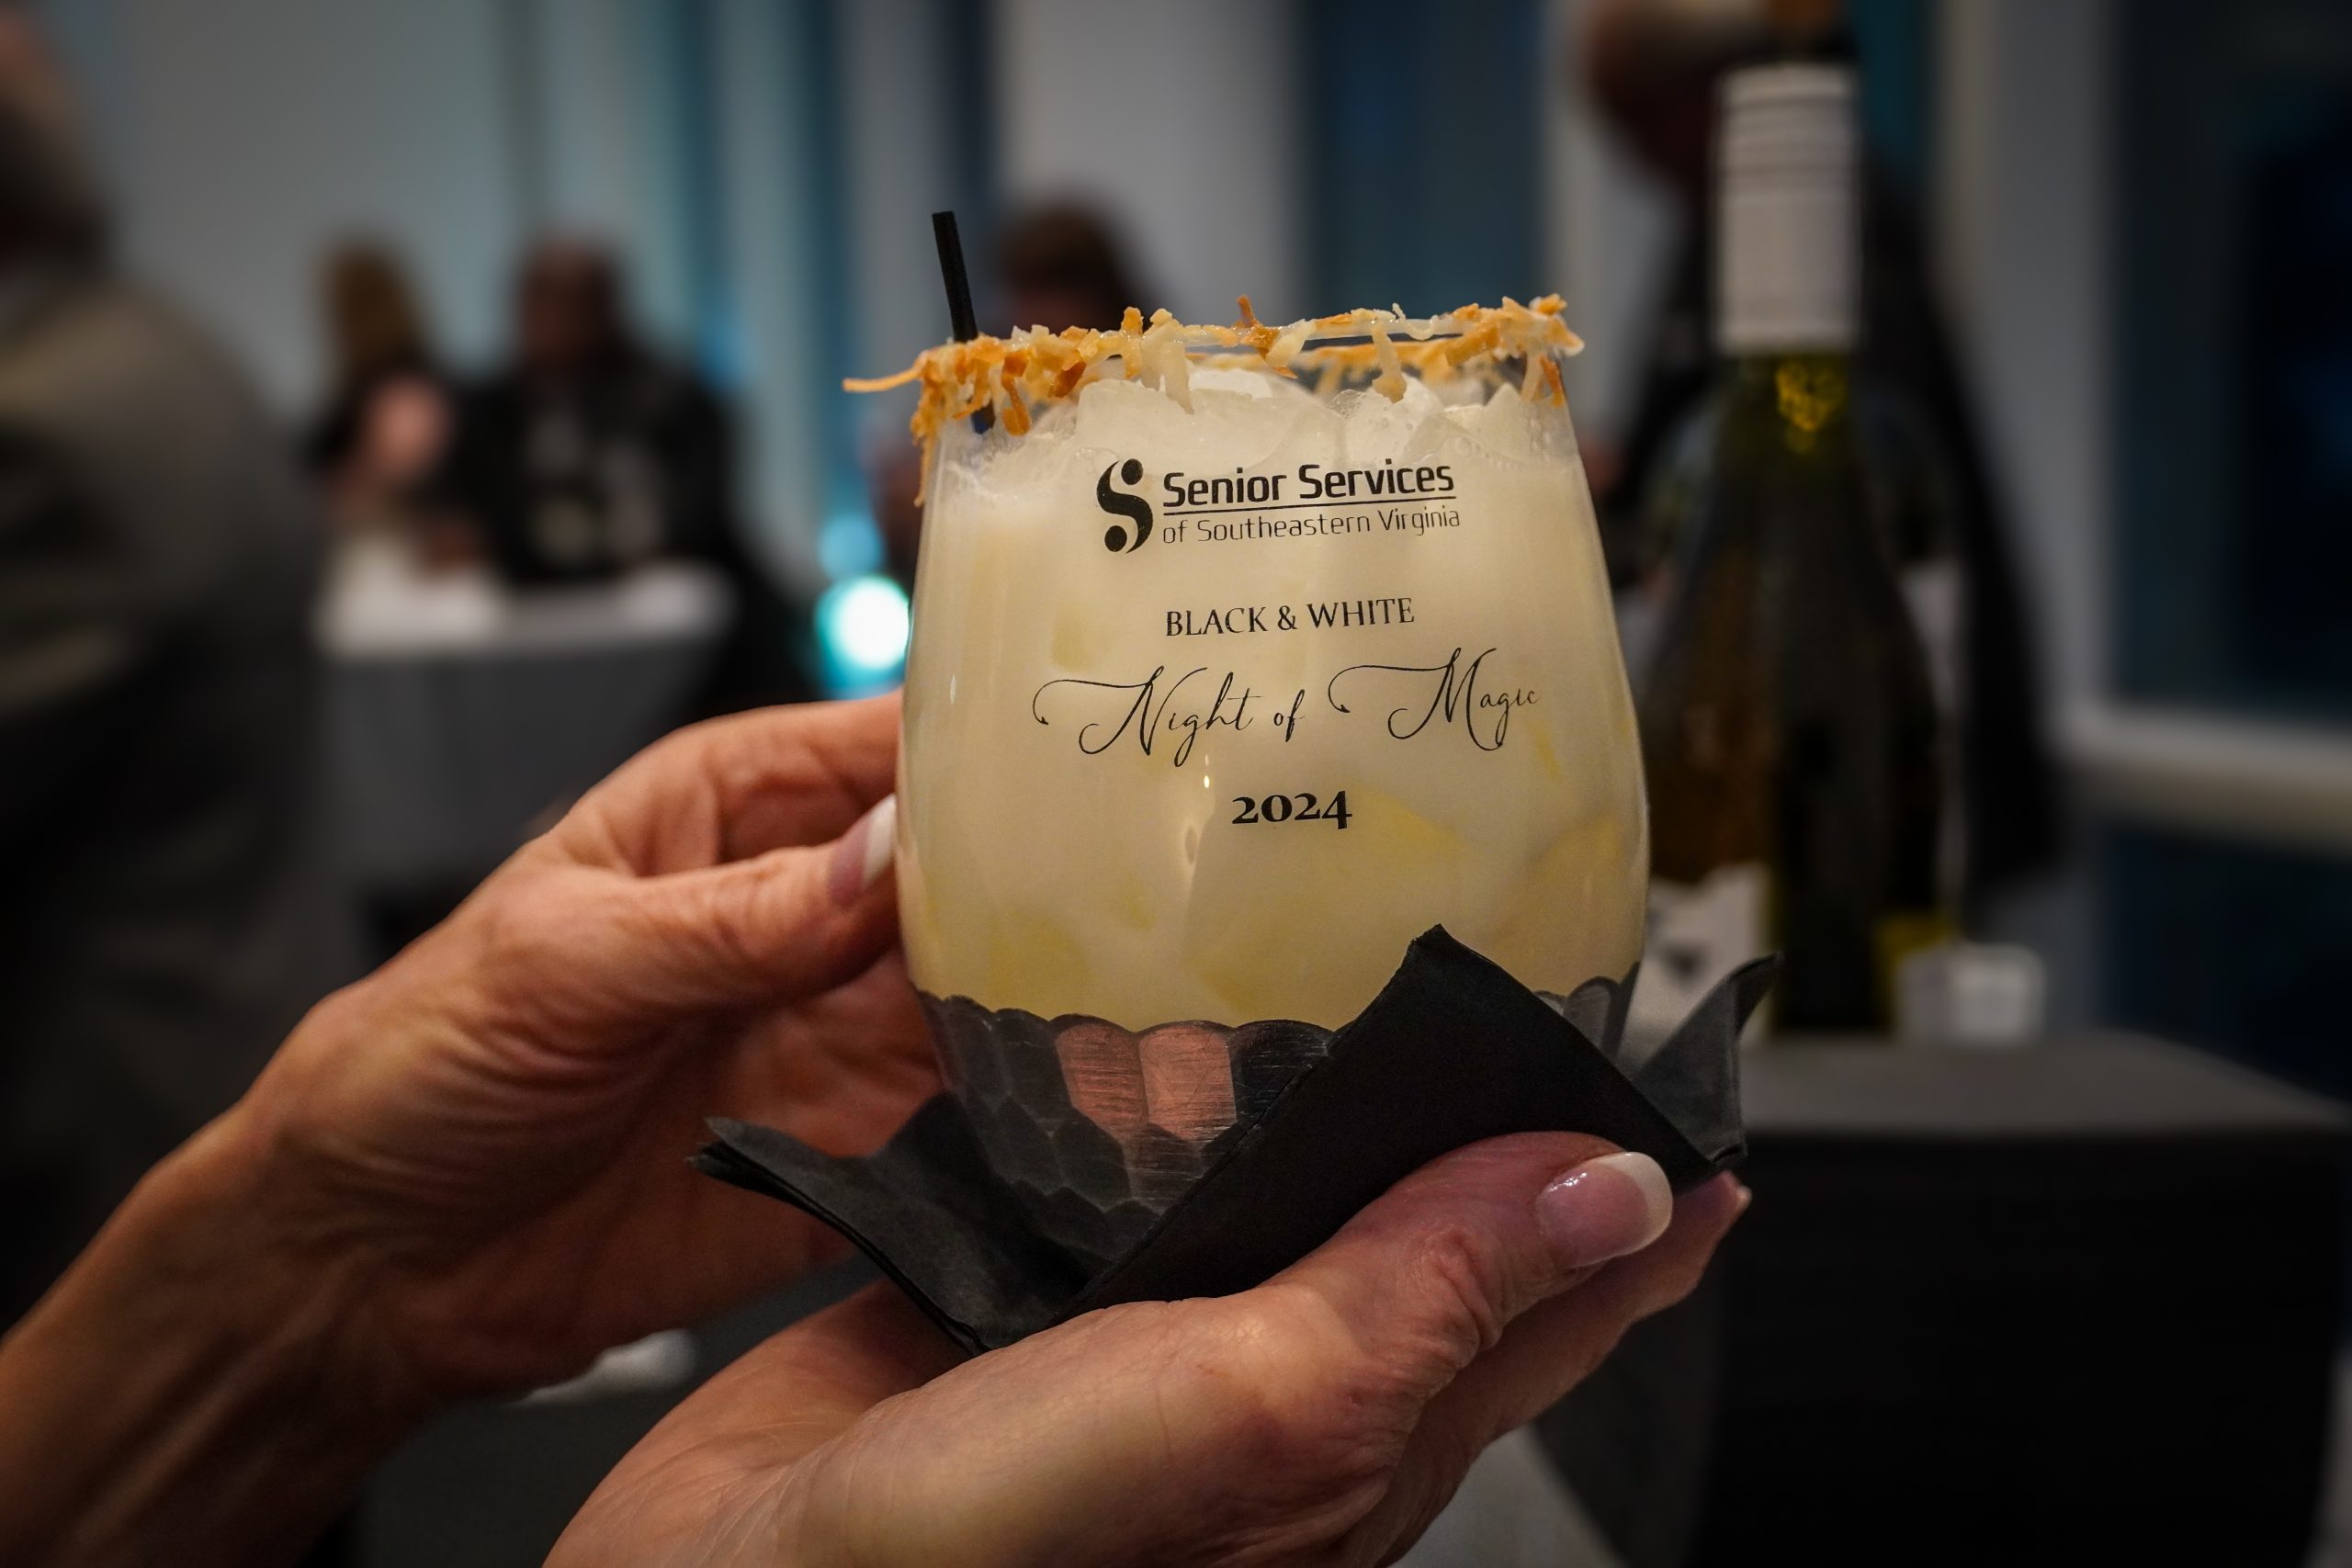 signature cocktail in senior services commemorative glass being held by woman